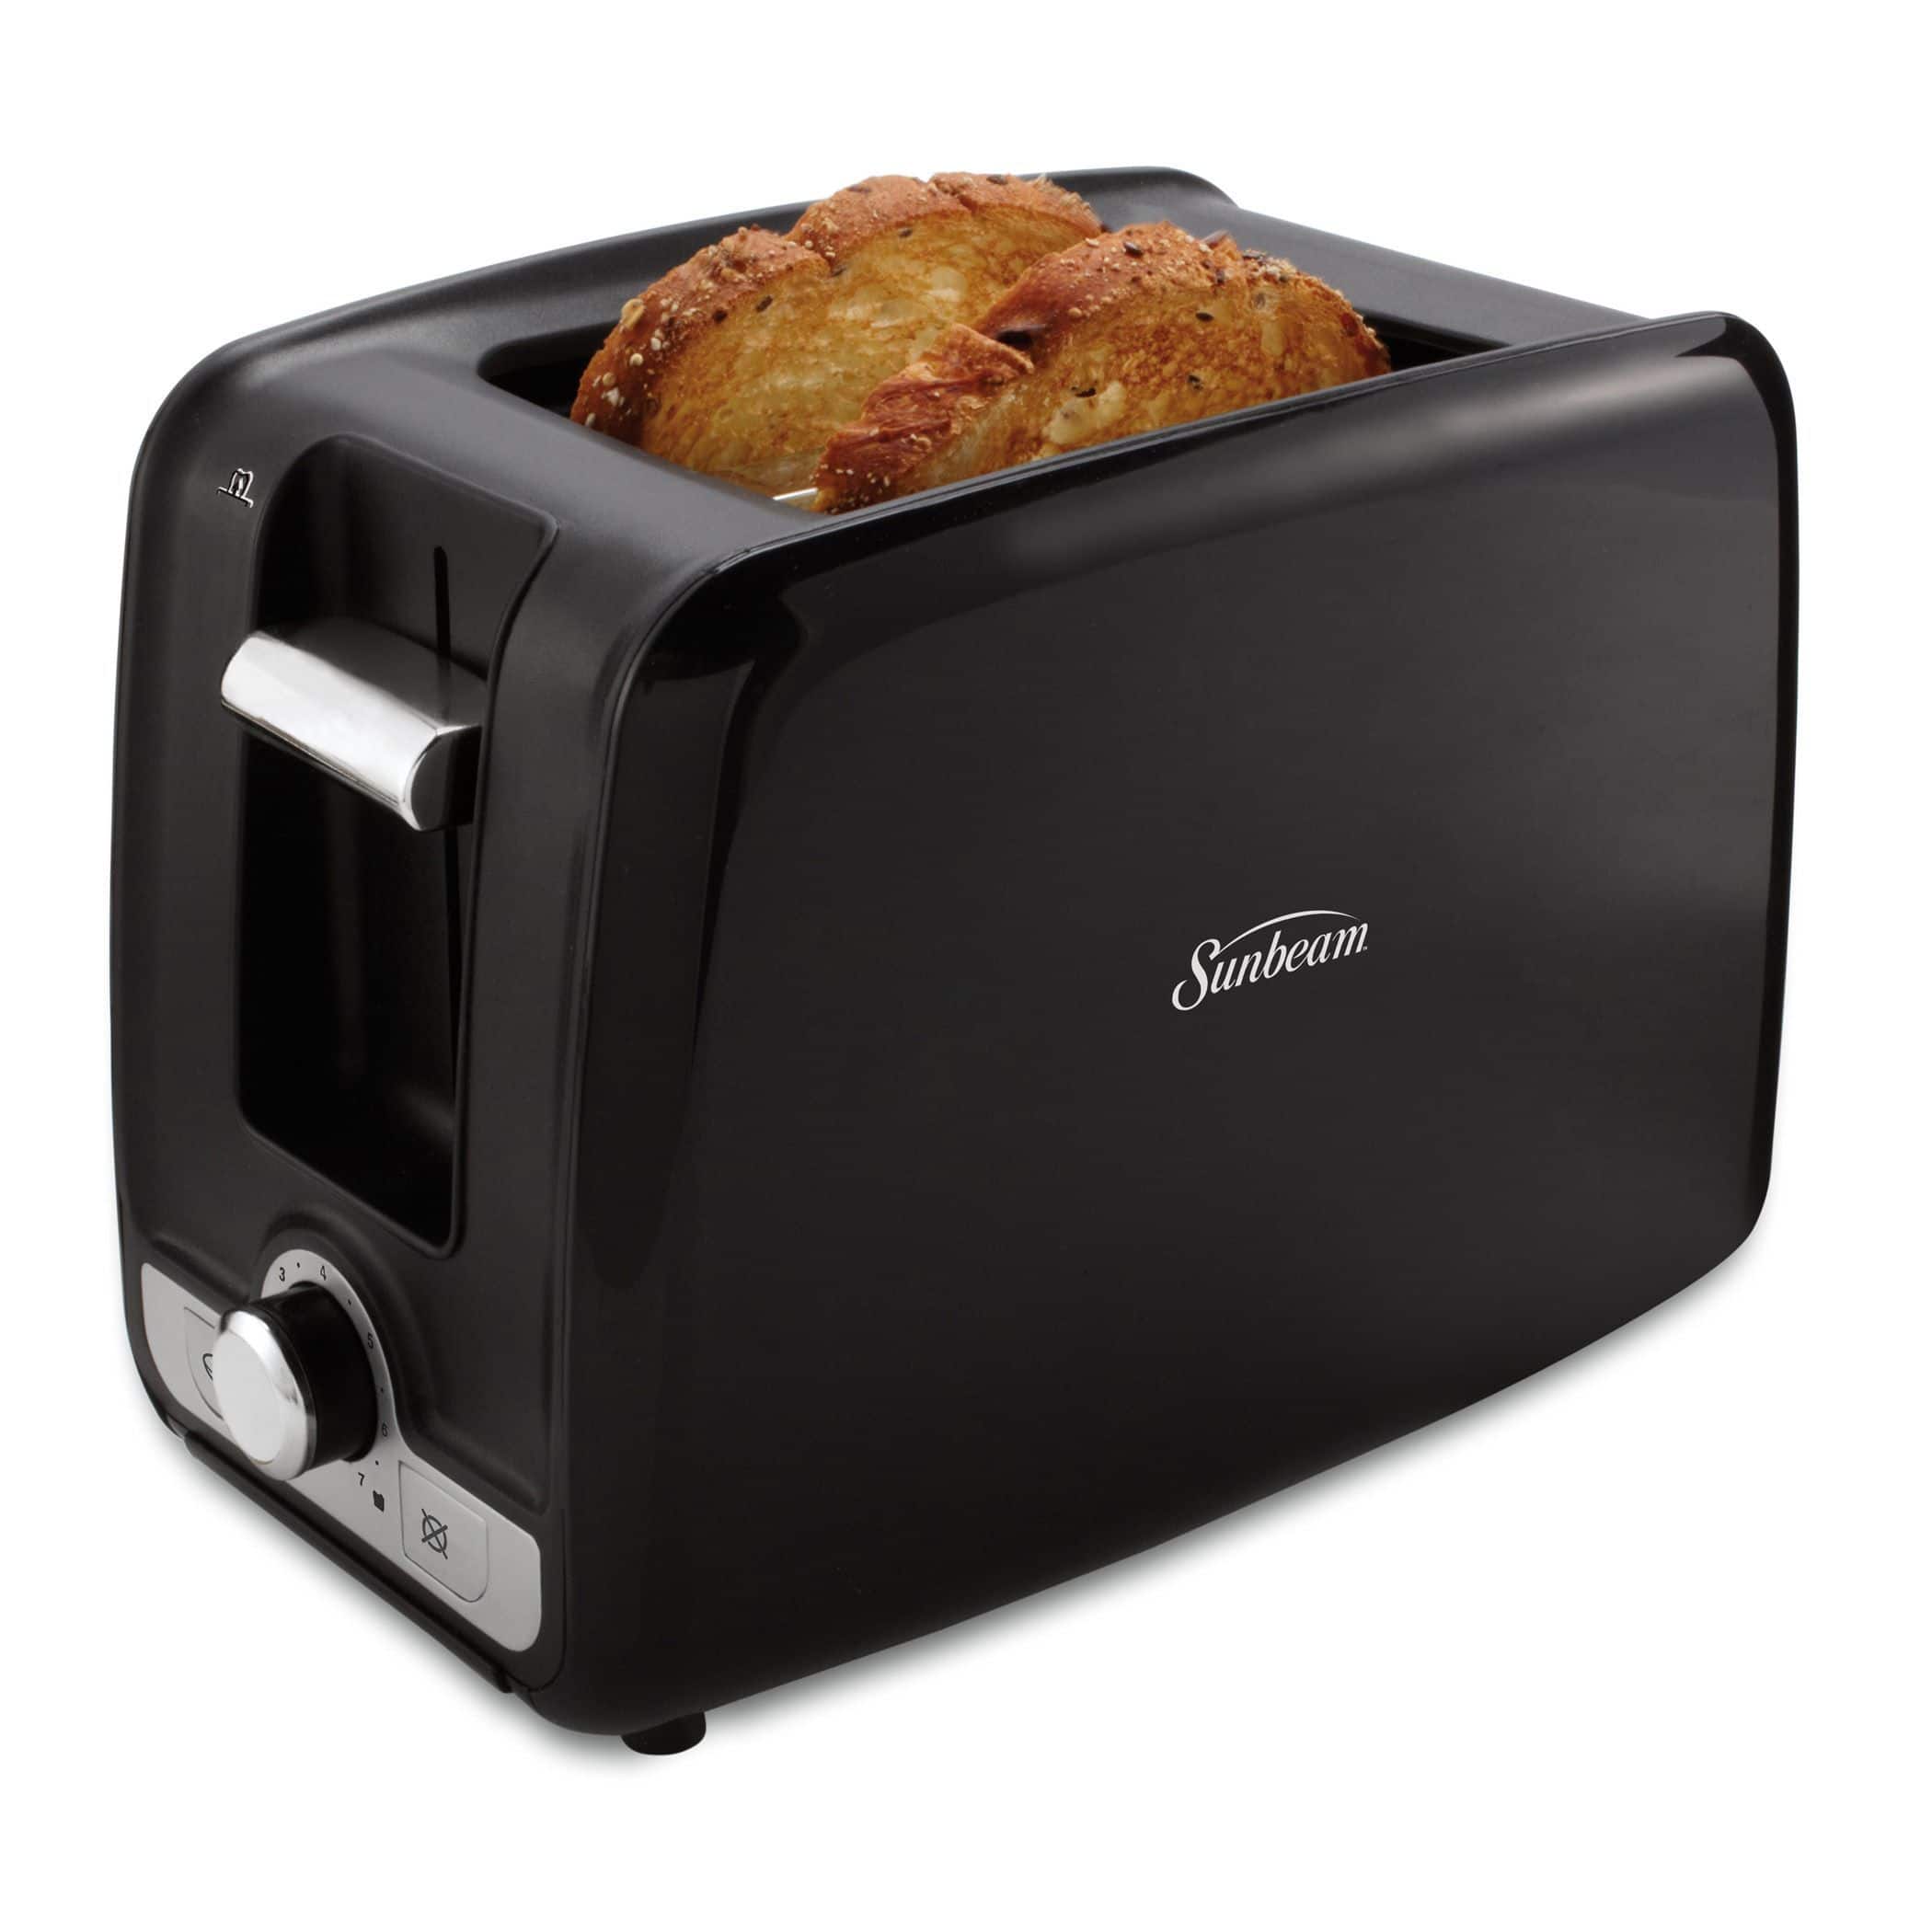 https://media-www.canadiantire.ca/product/living/kitchen/kitchen-appliances/0740297/2-sl-toaster-retractable-cord-black-chrome-accents-a3160ae1-5310-407a-bf90-d6b3c9825f80-jpgrendition.jpg